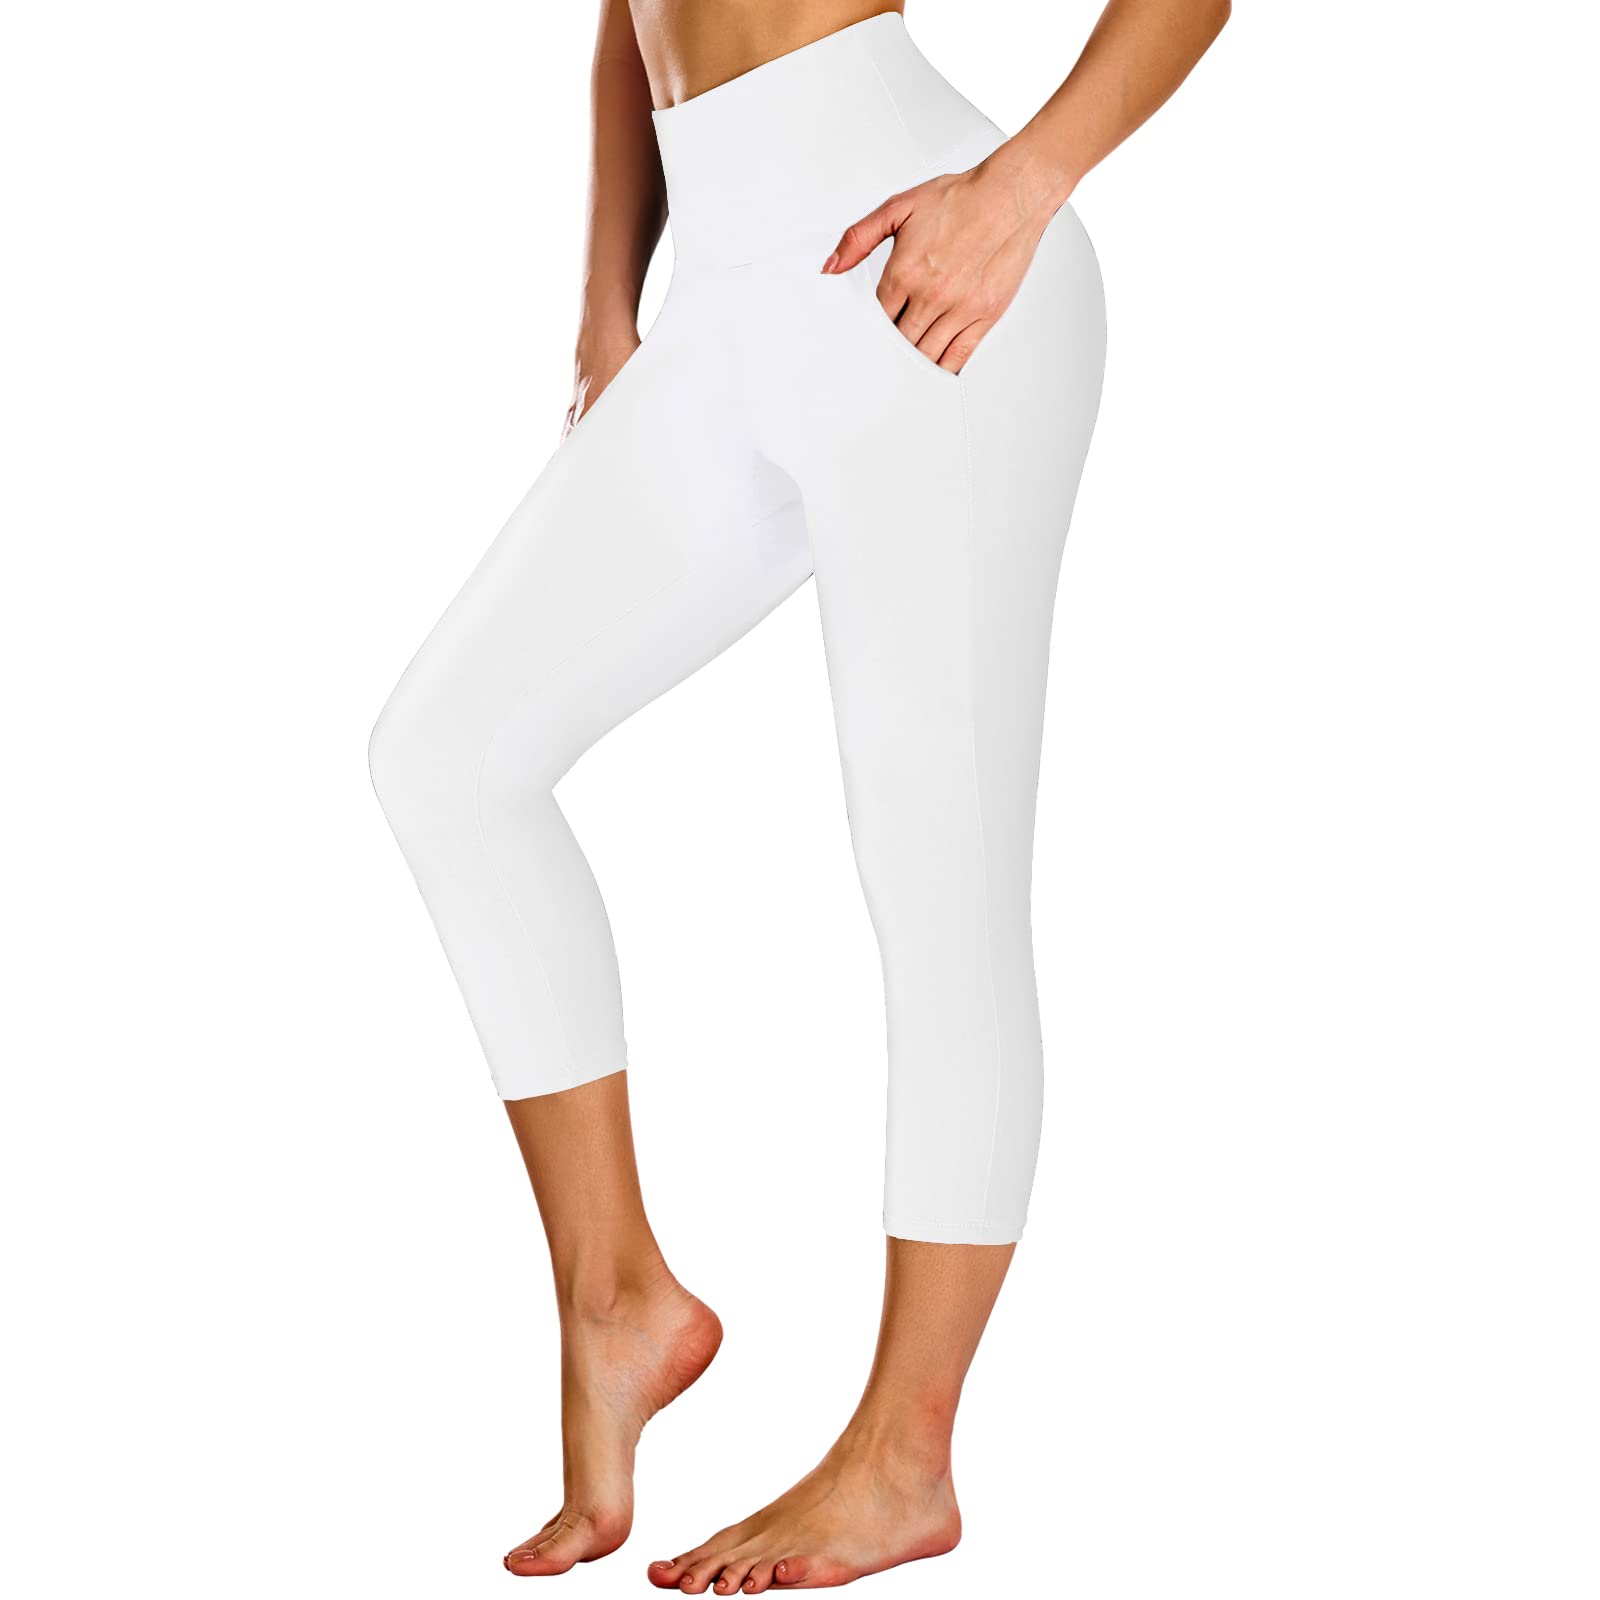 NEW YOUNG High Waisted Capri Leggings for Women-Workout Pants for